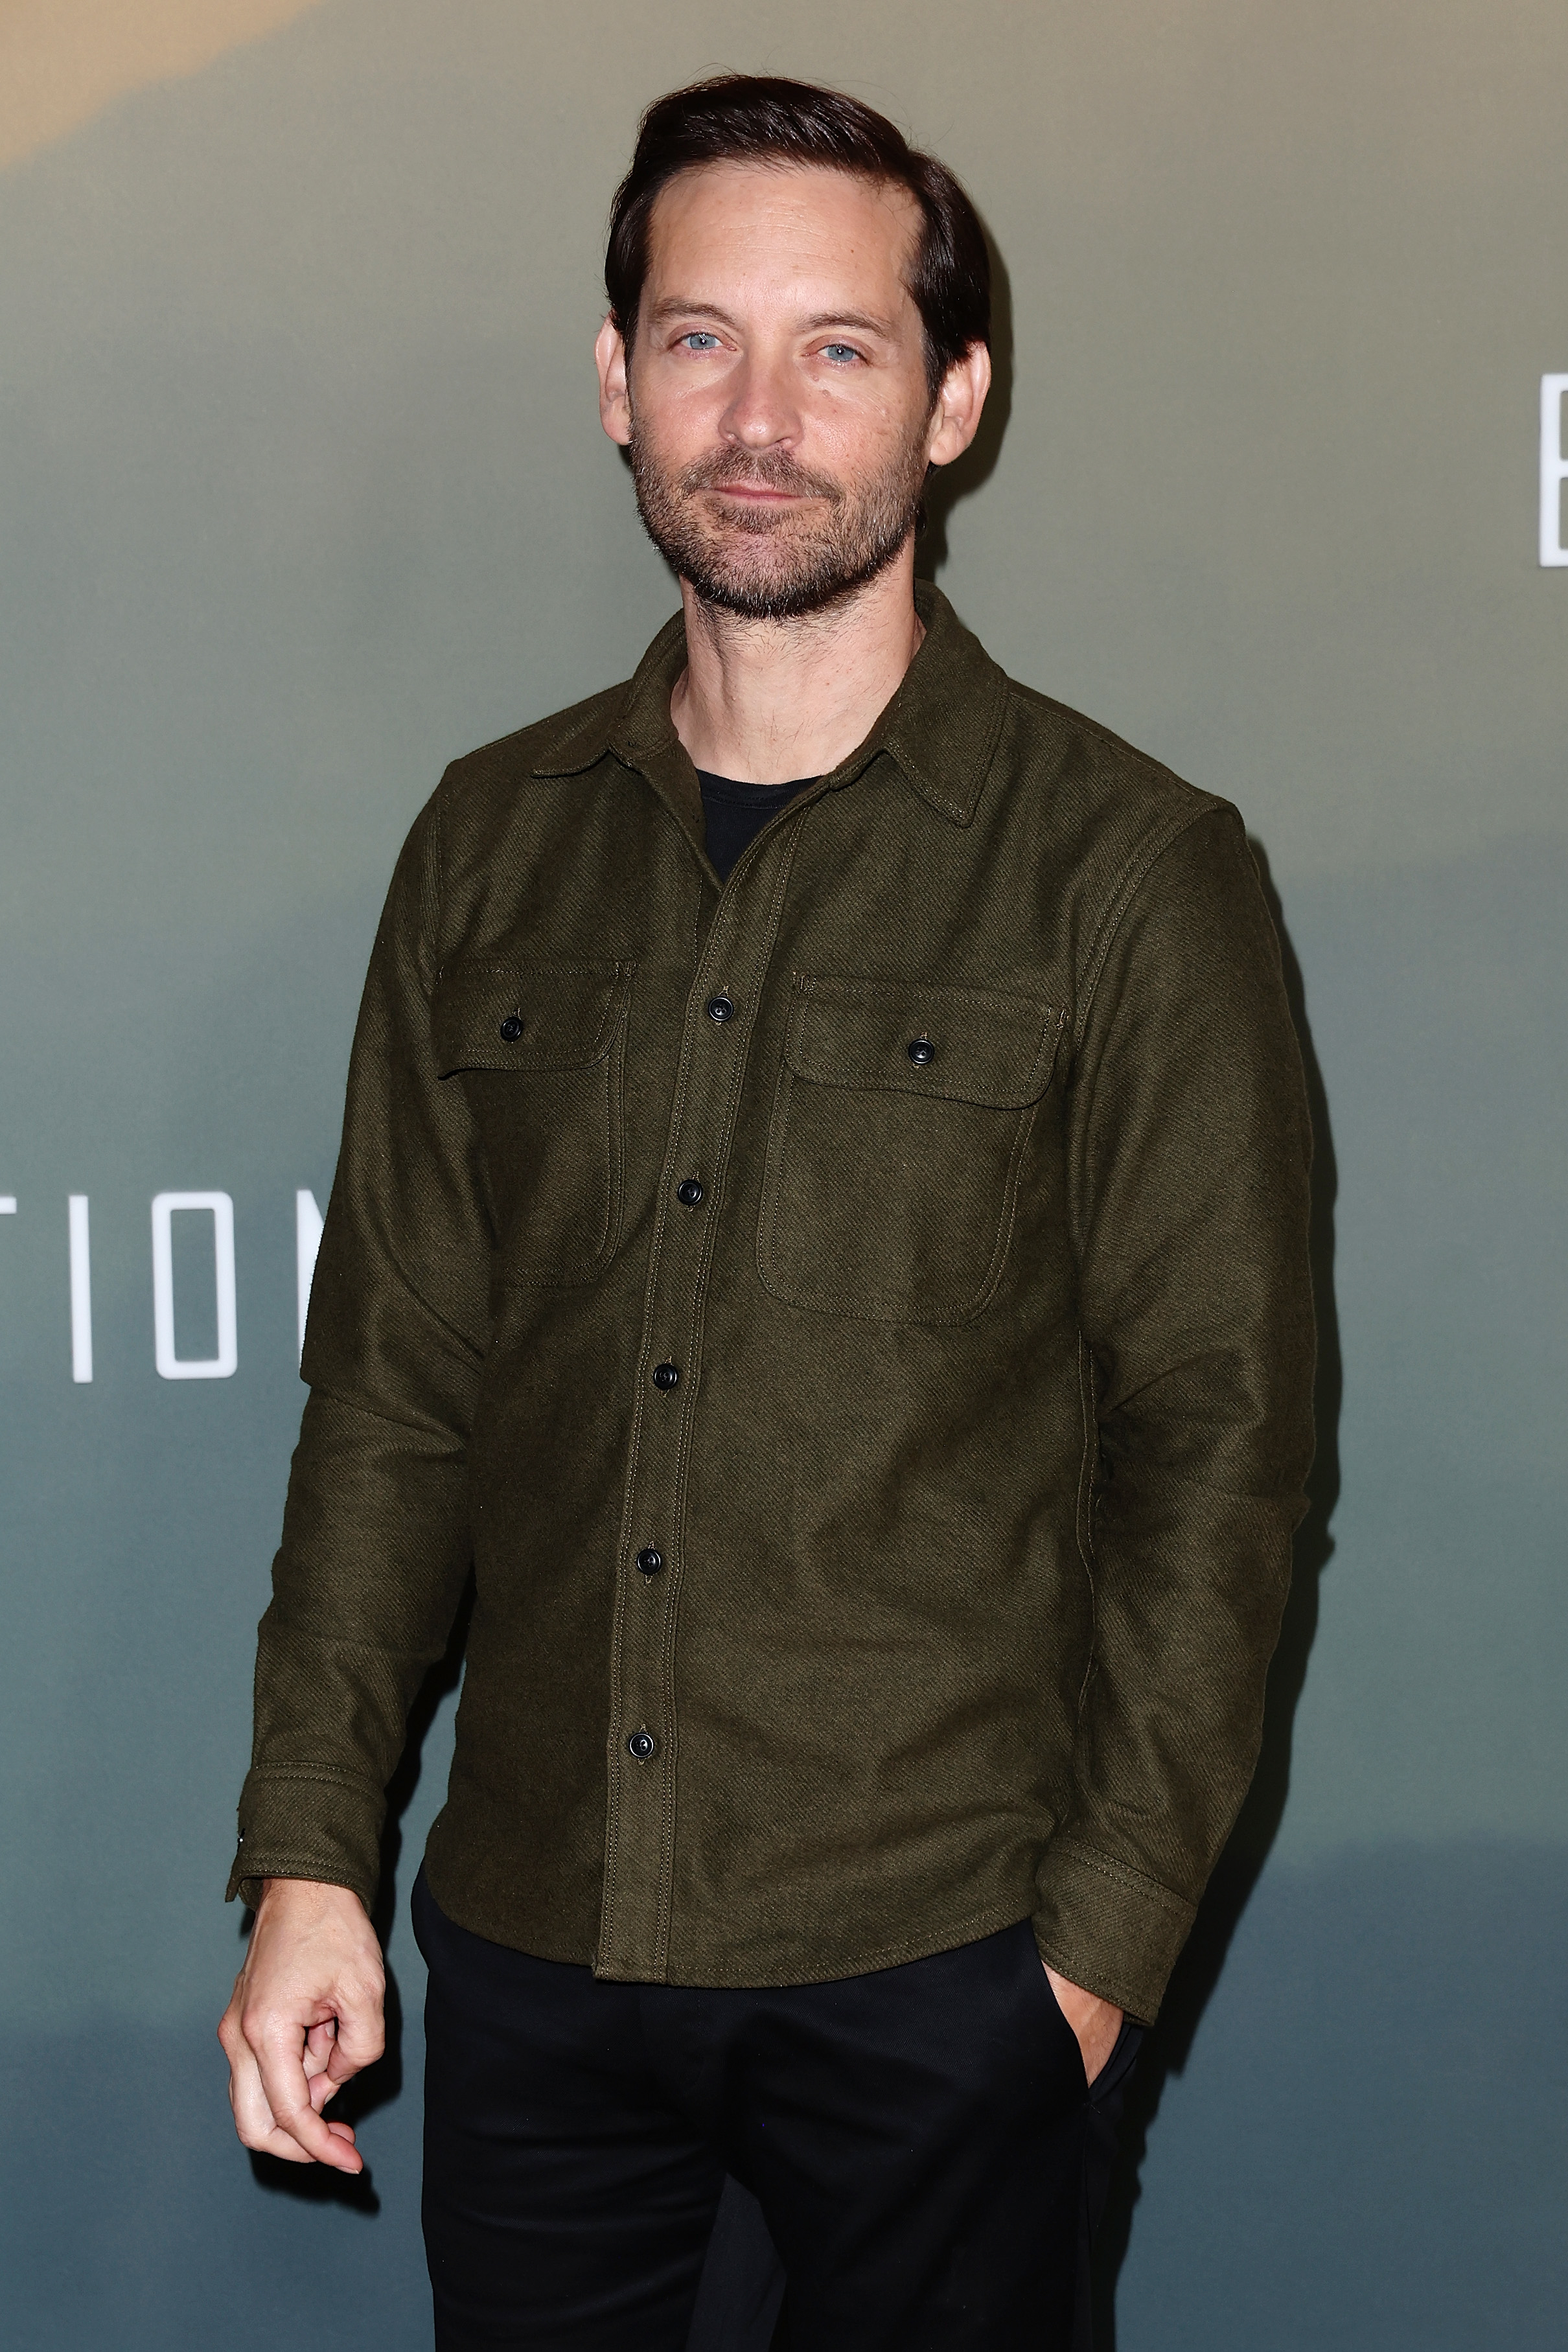 Tobey Maguire posing in a casual button-up shirt and pants at a press event